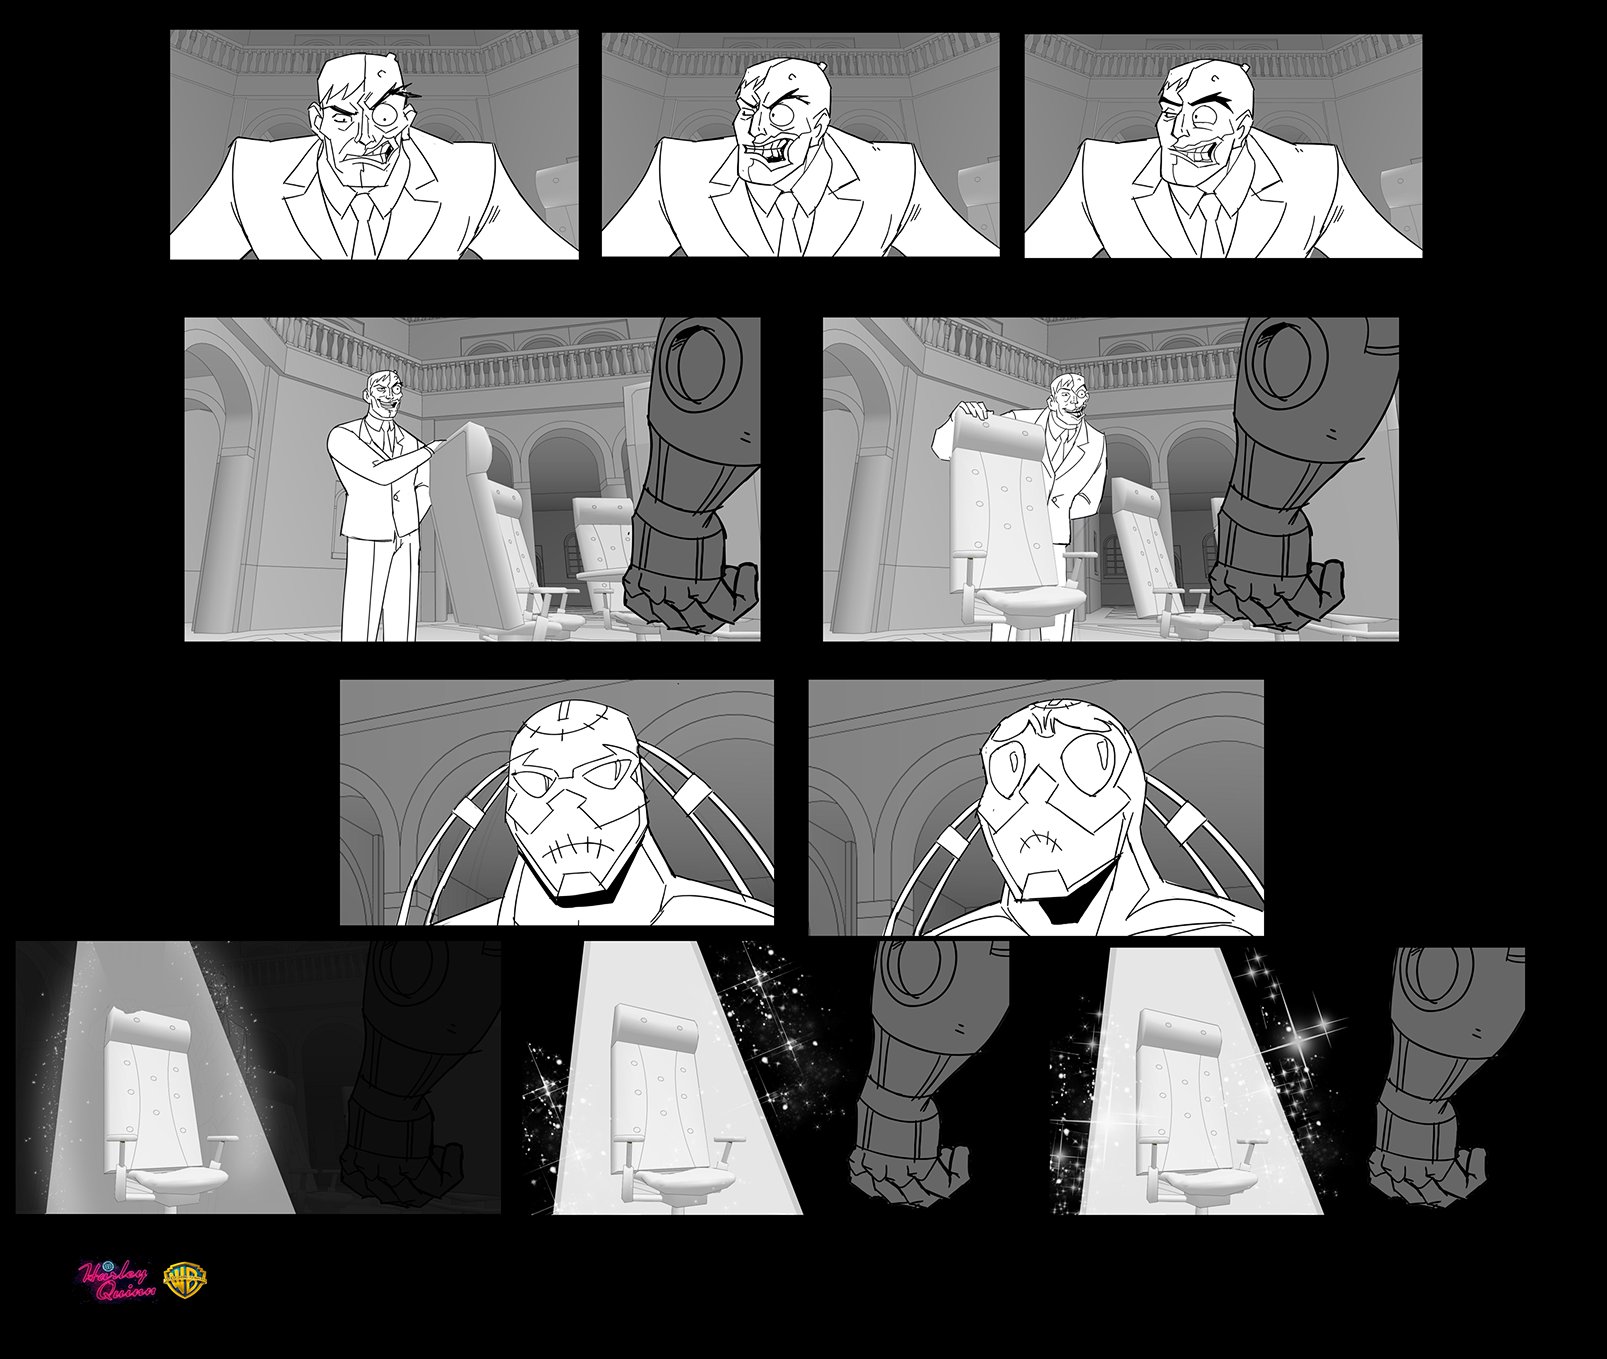 Image:18 HQ Two-Face & Bane 1 storyboard.jpg